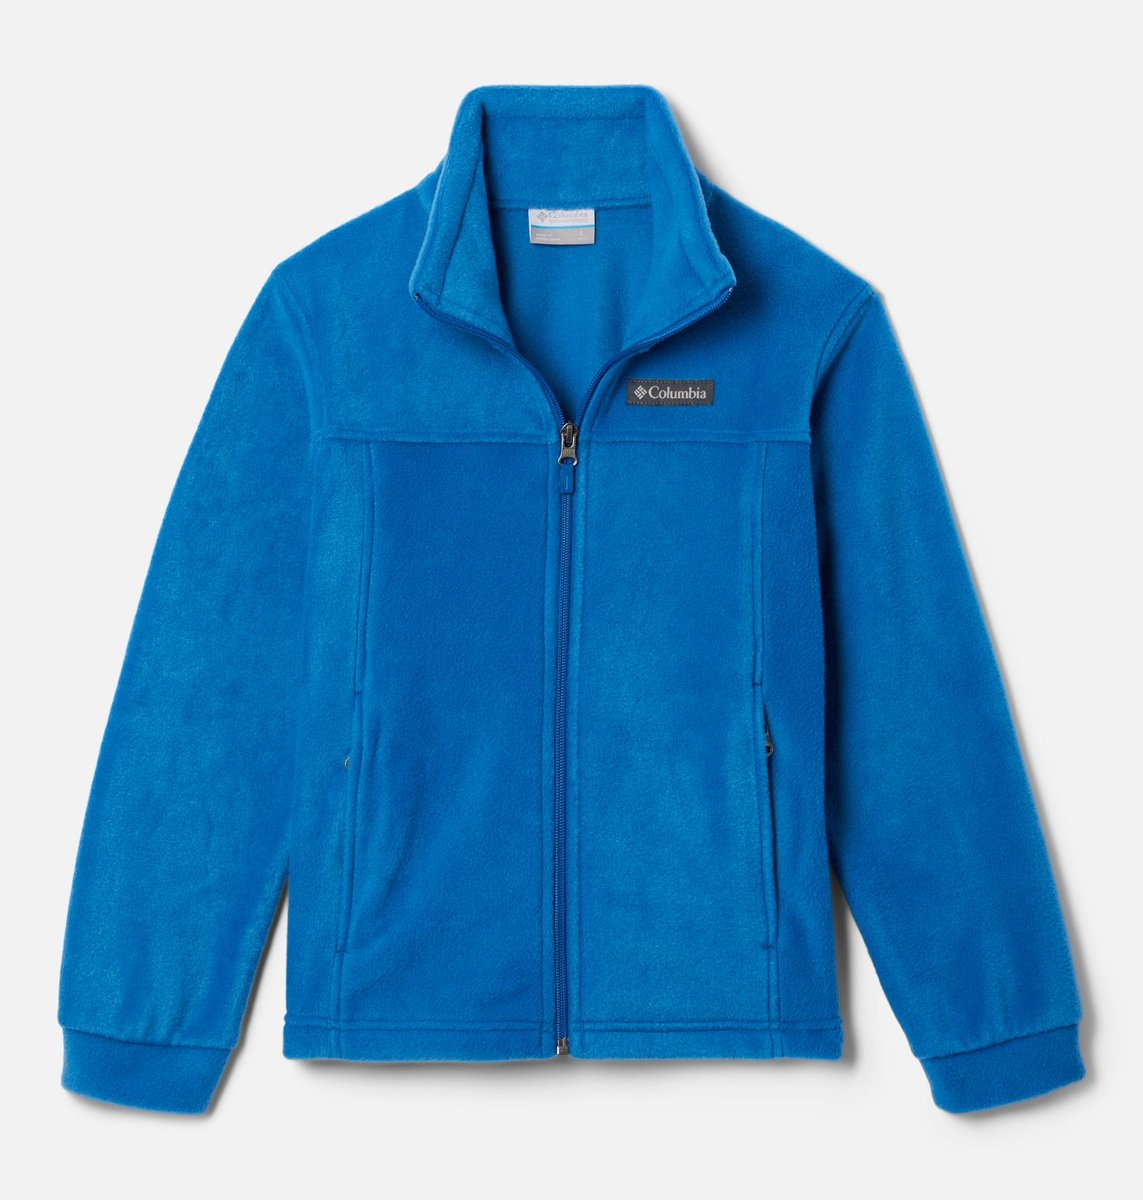 44% off ..... $24.99
(ad) jo.my/nx3xks
Boys’ Steens Mountain™ II Fleece Jacket from Columbia
Discounts may change/expire at any time.
Jan2024